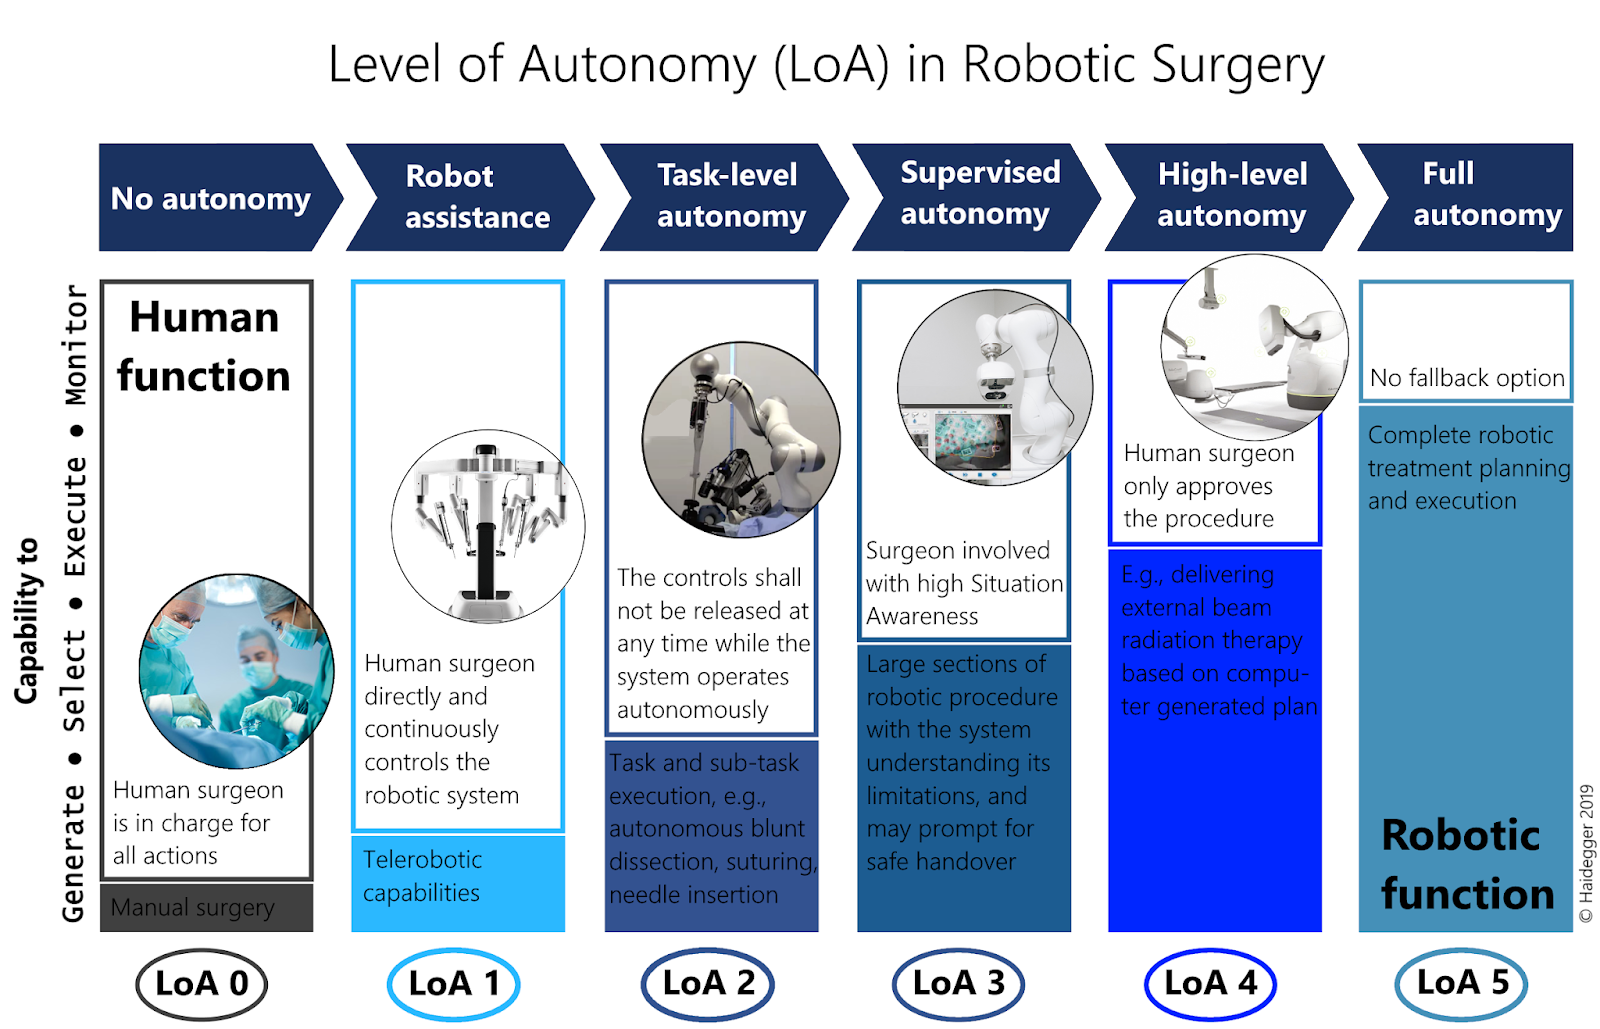 Level of Autonomy for surgical